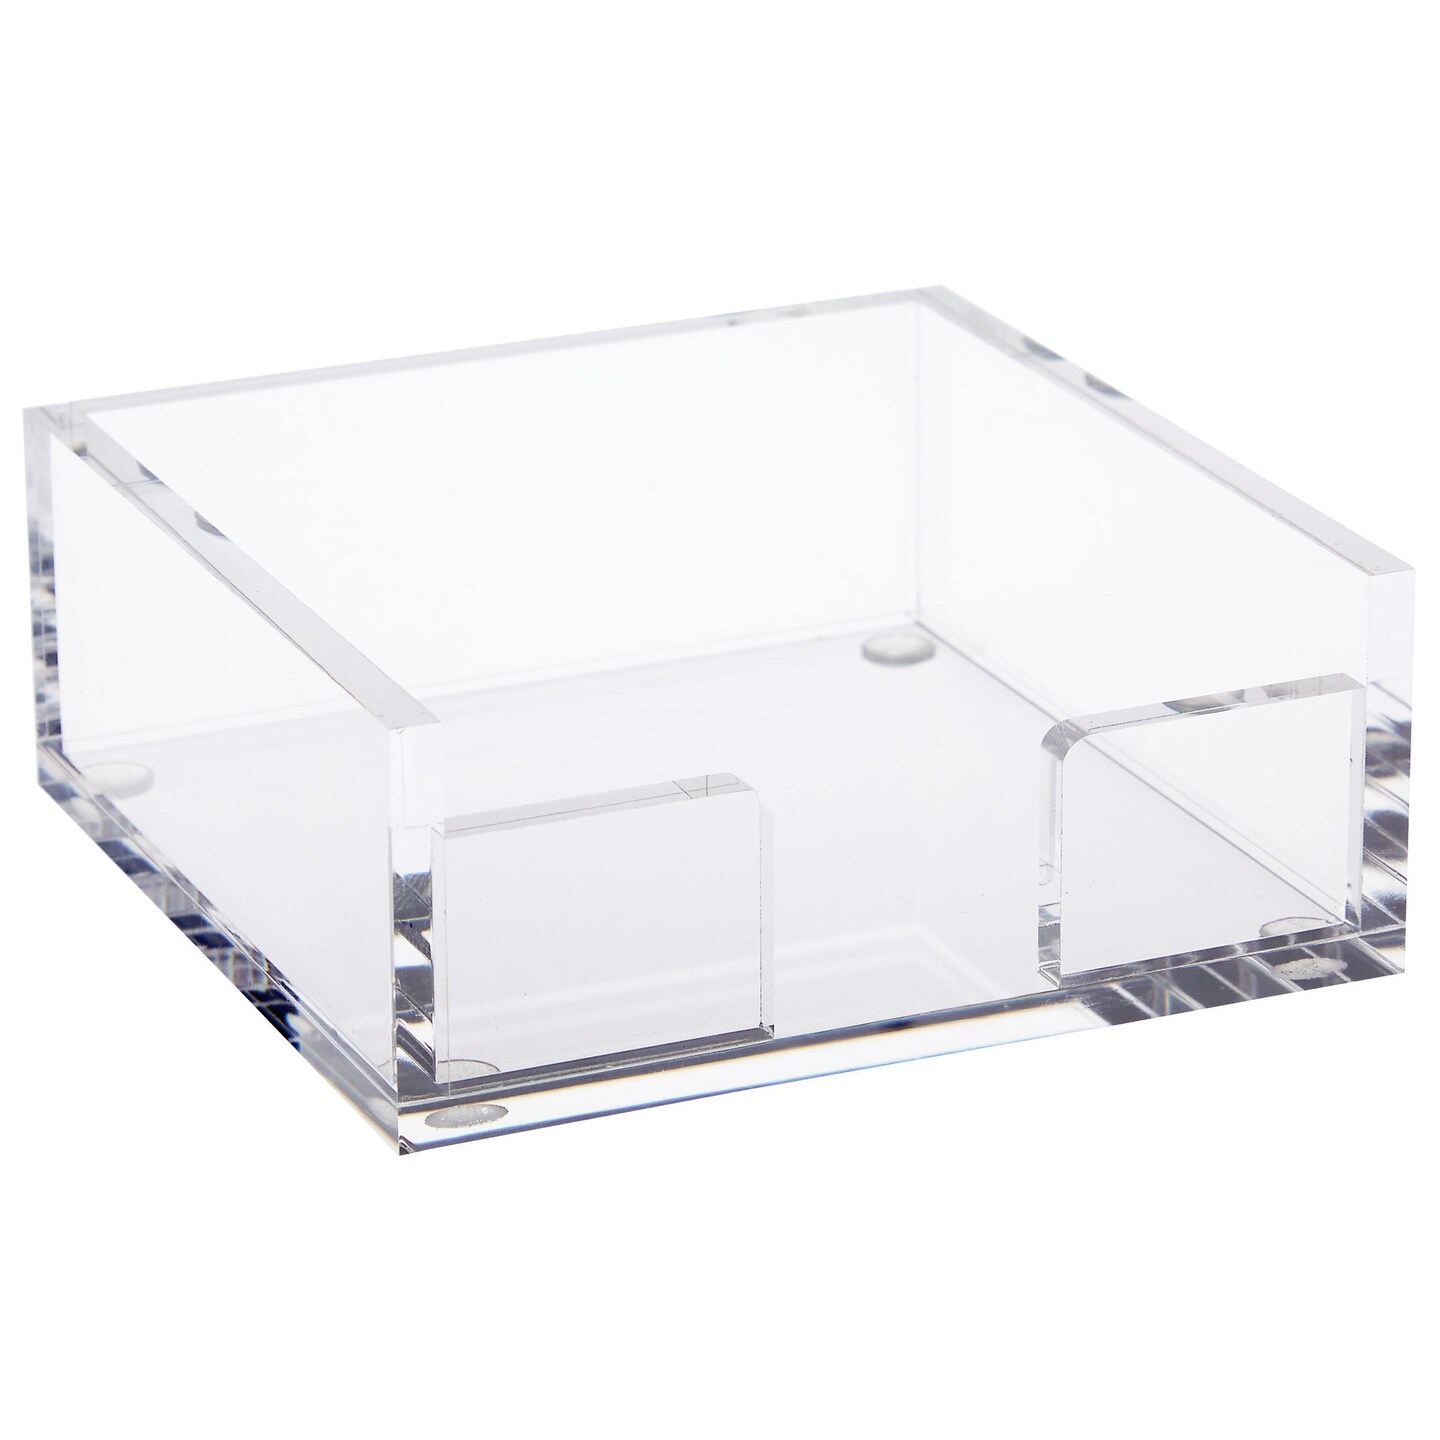 Acrylic Desk Organizer for Office Supplies and Desk Accessories